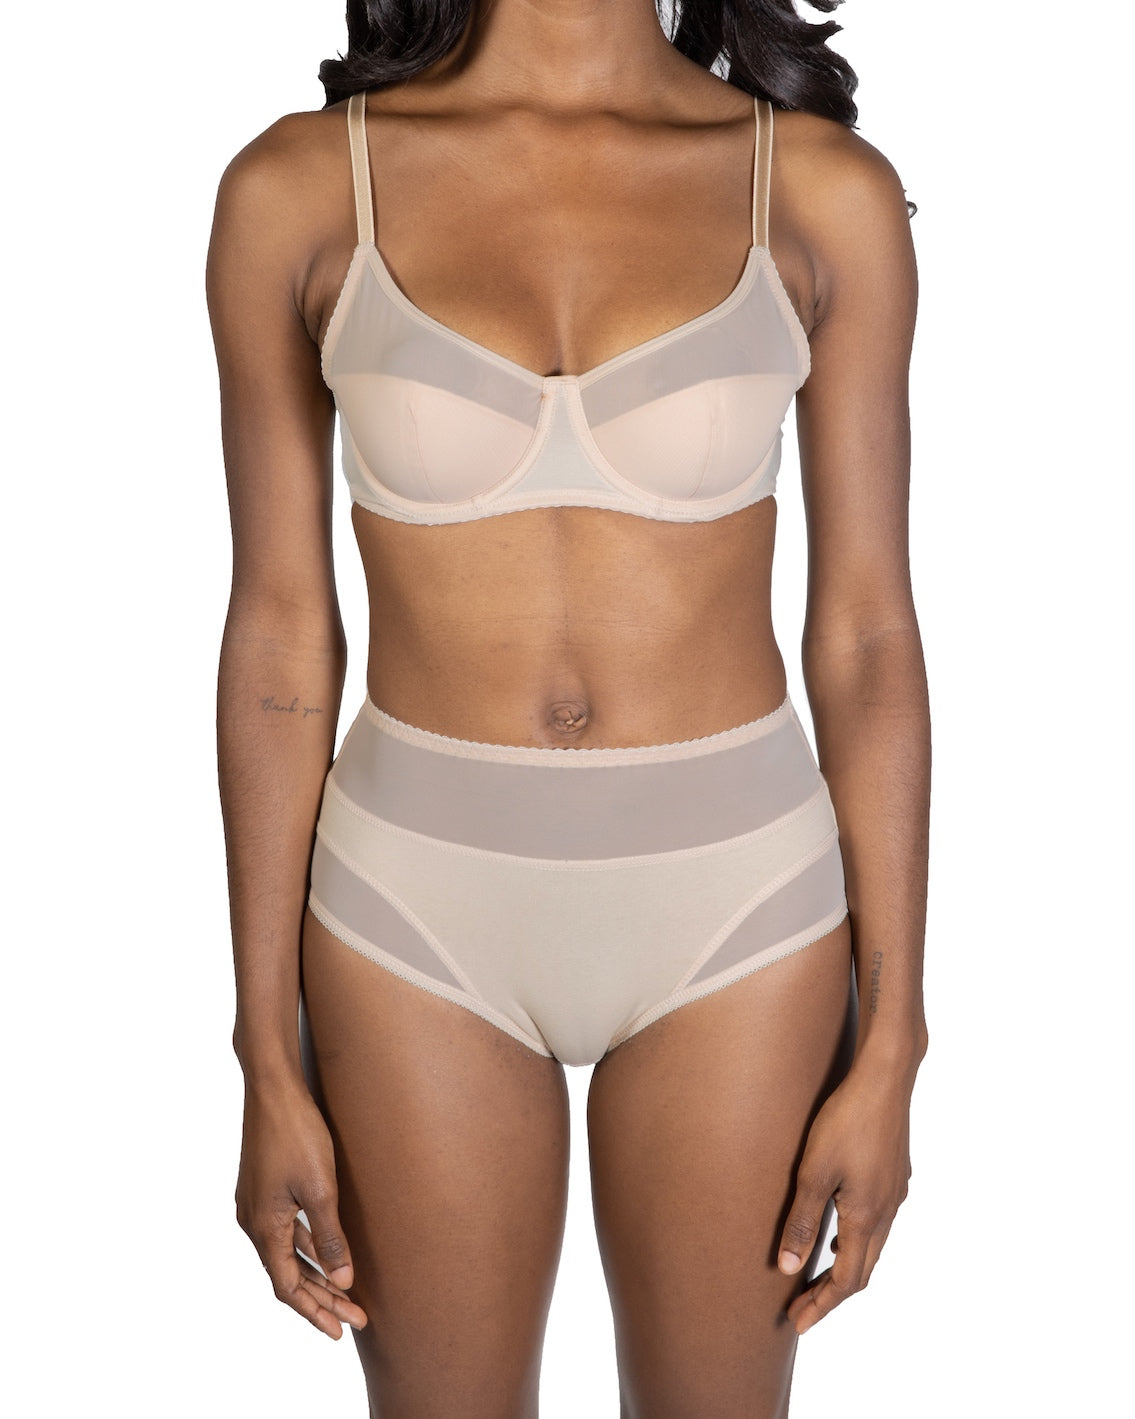 Antares Full Support Bra With Lift